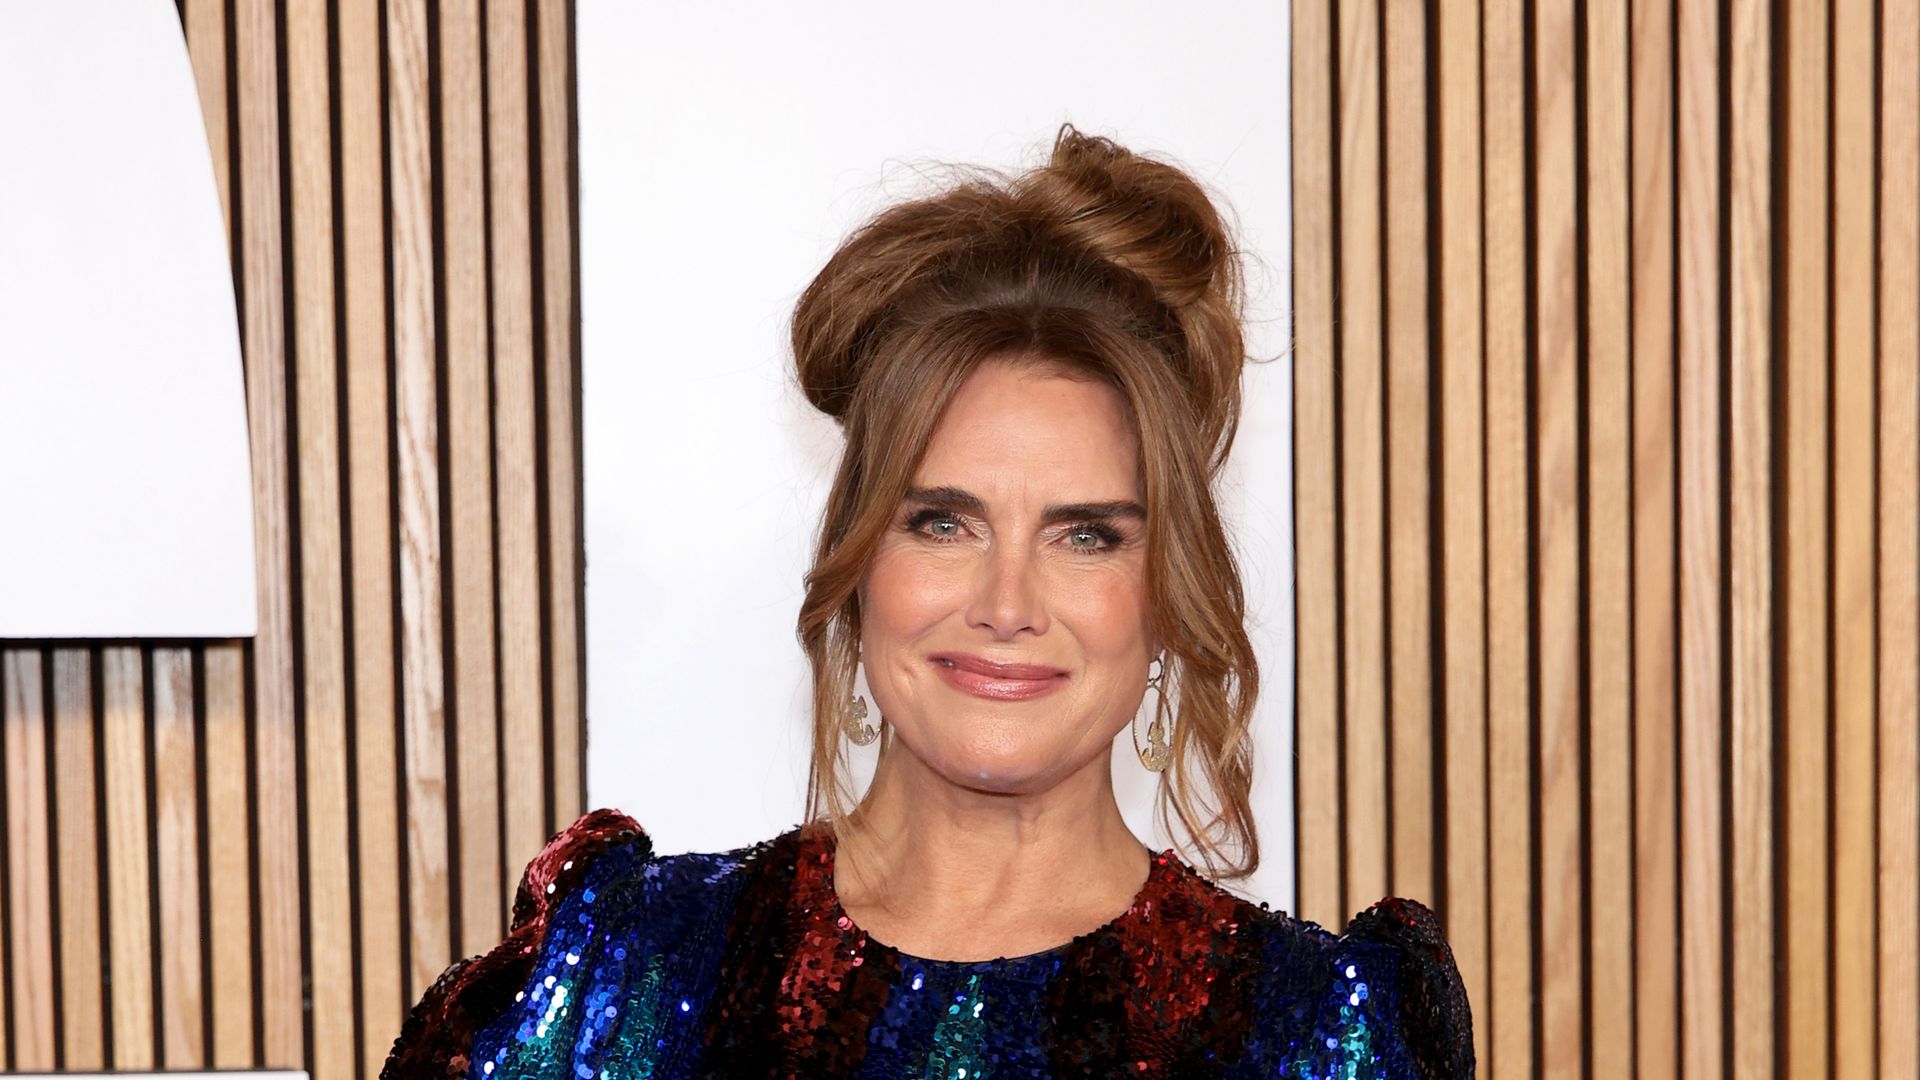 Brooke Shields reveals the surprising diet change she made after terrifying seizure